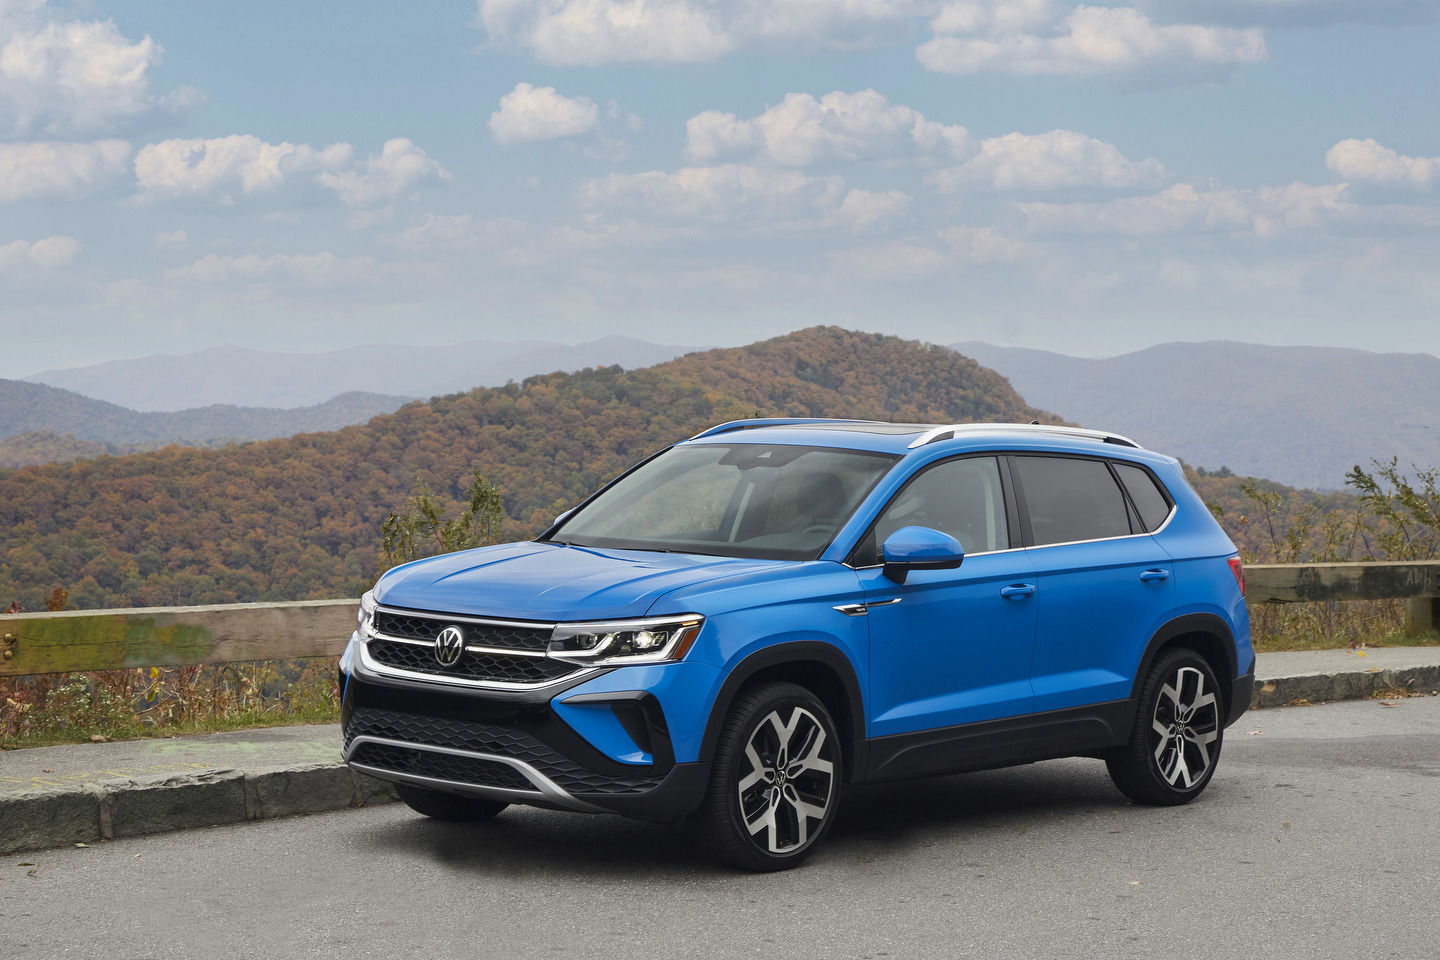 2022 Volkswagen Taos: Everything You Need to Know